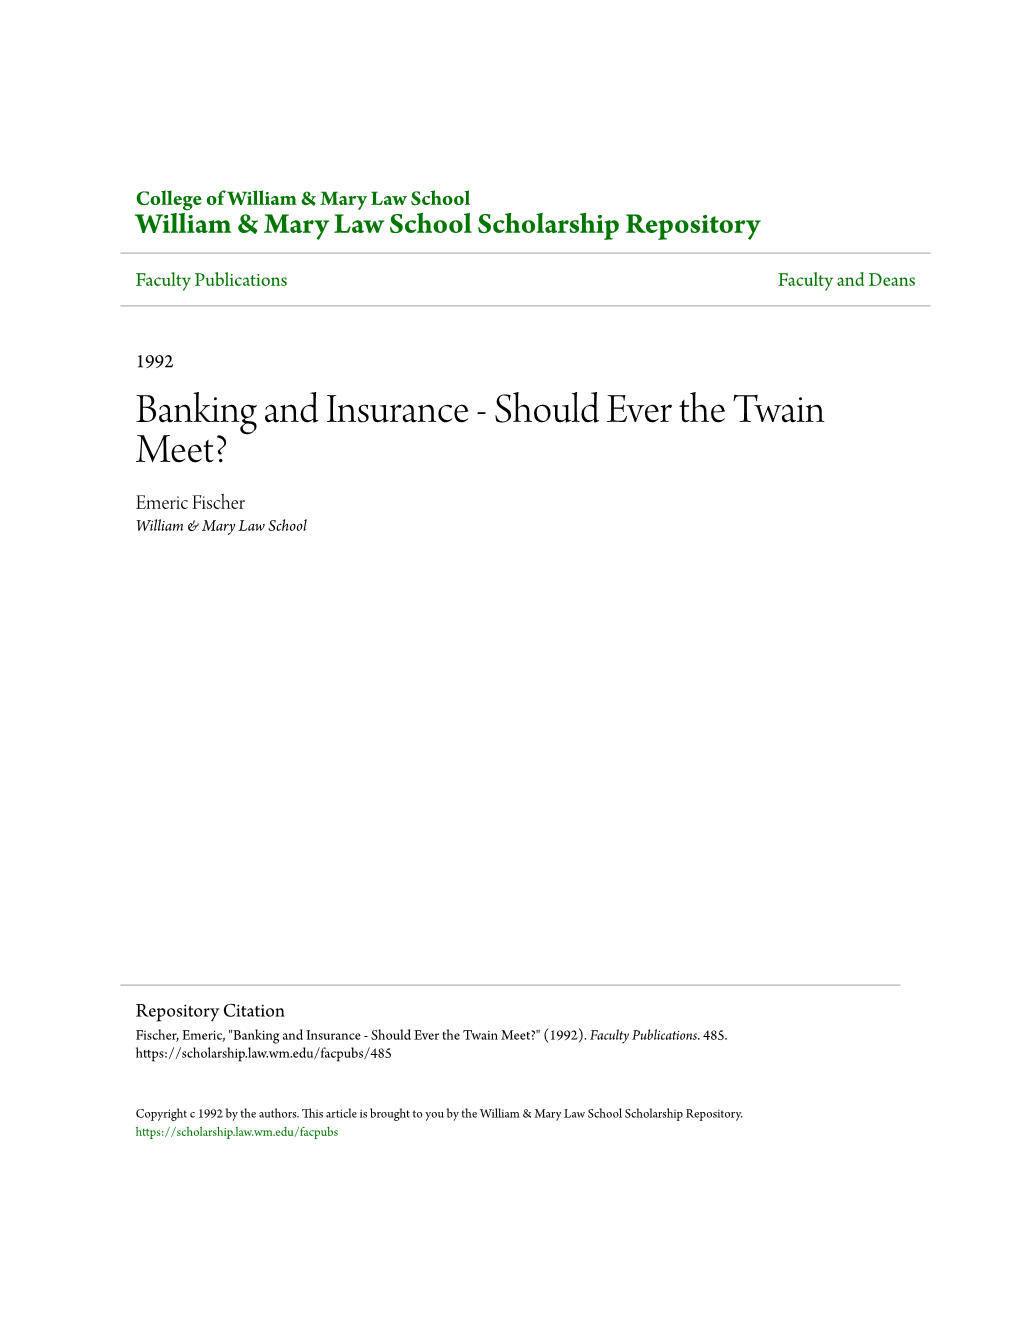 Banking and Insurance - Should Ever the Twain Meet? Emeric Fischer William & Mary Law School